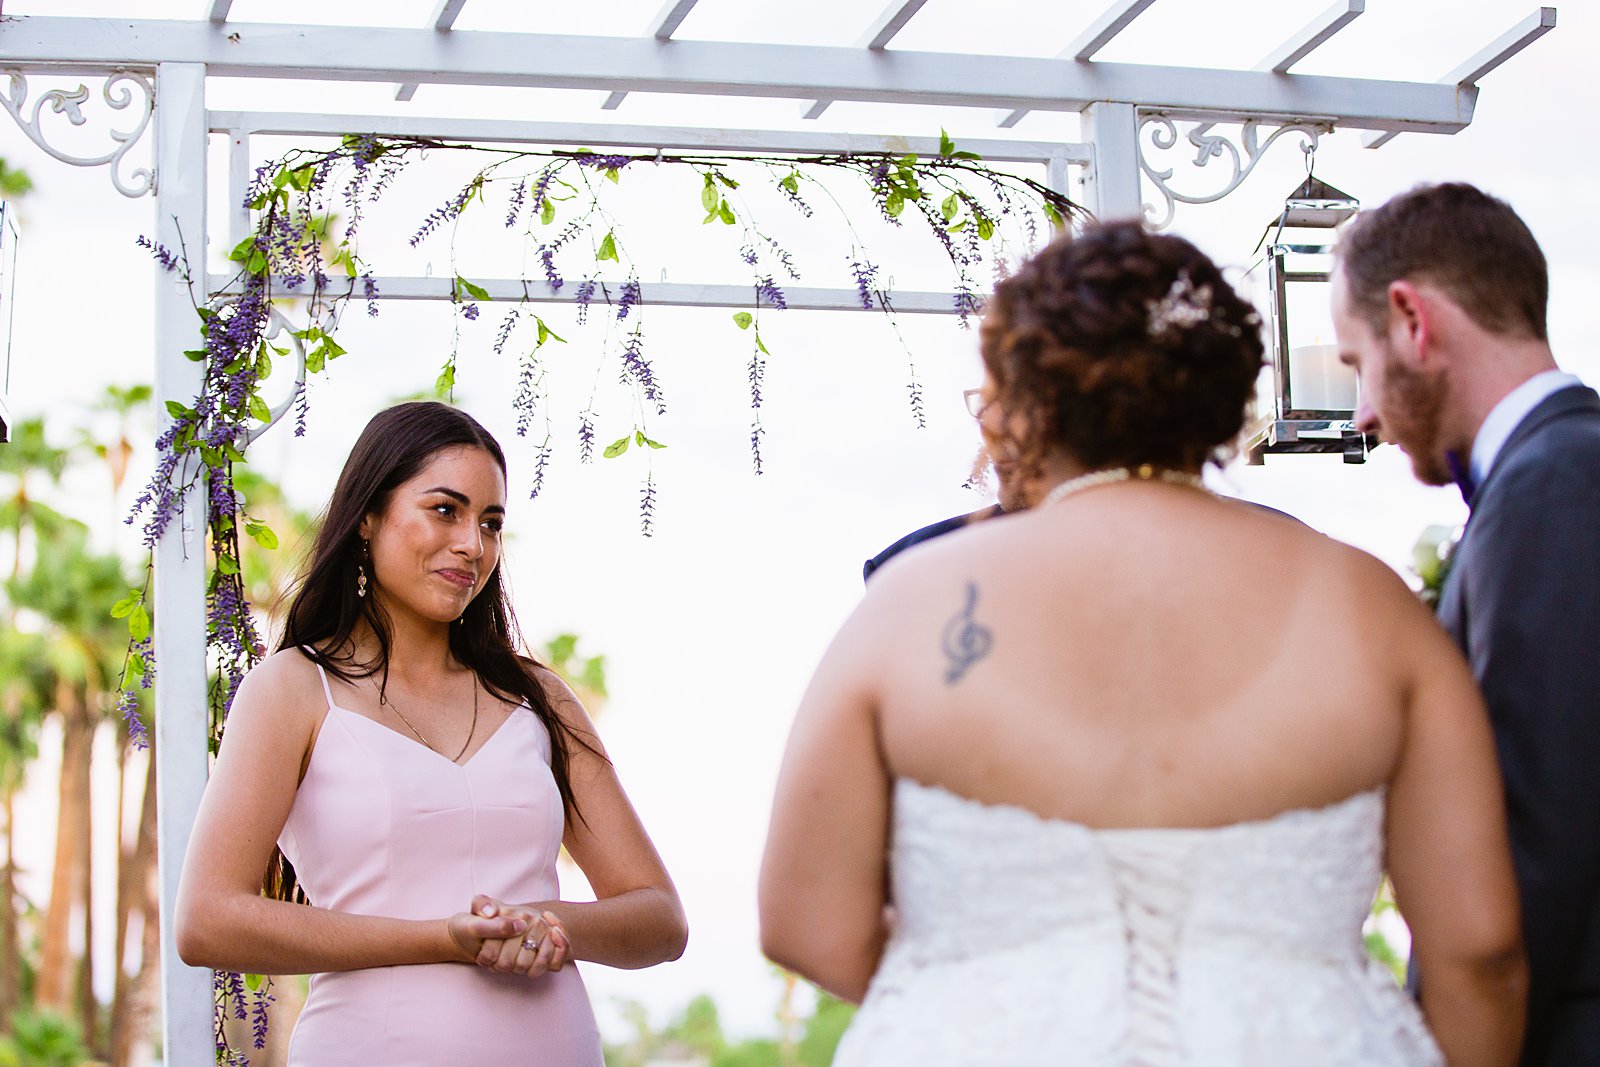 Wedding guest giving a traditional Maori blessing during a wedding ceremony by Phoenix wedding photographer PMA Photography.